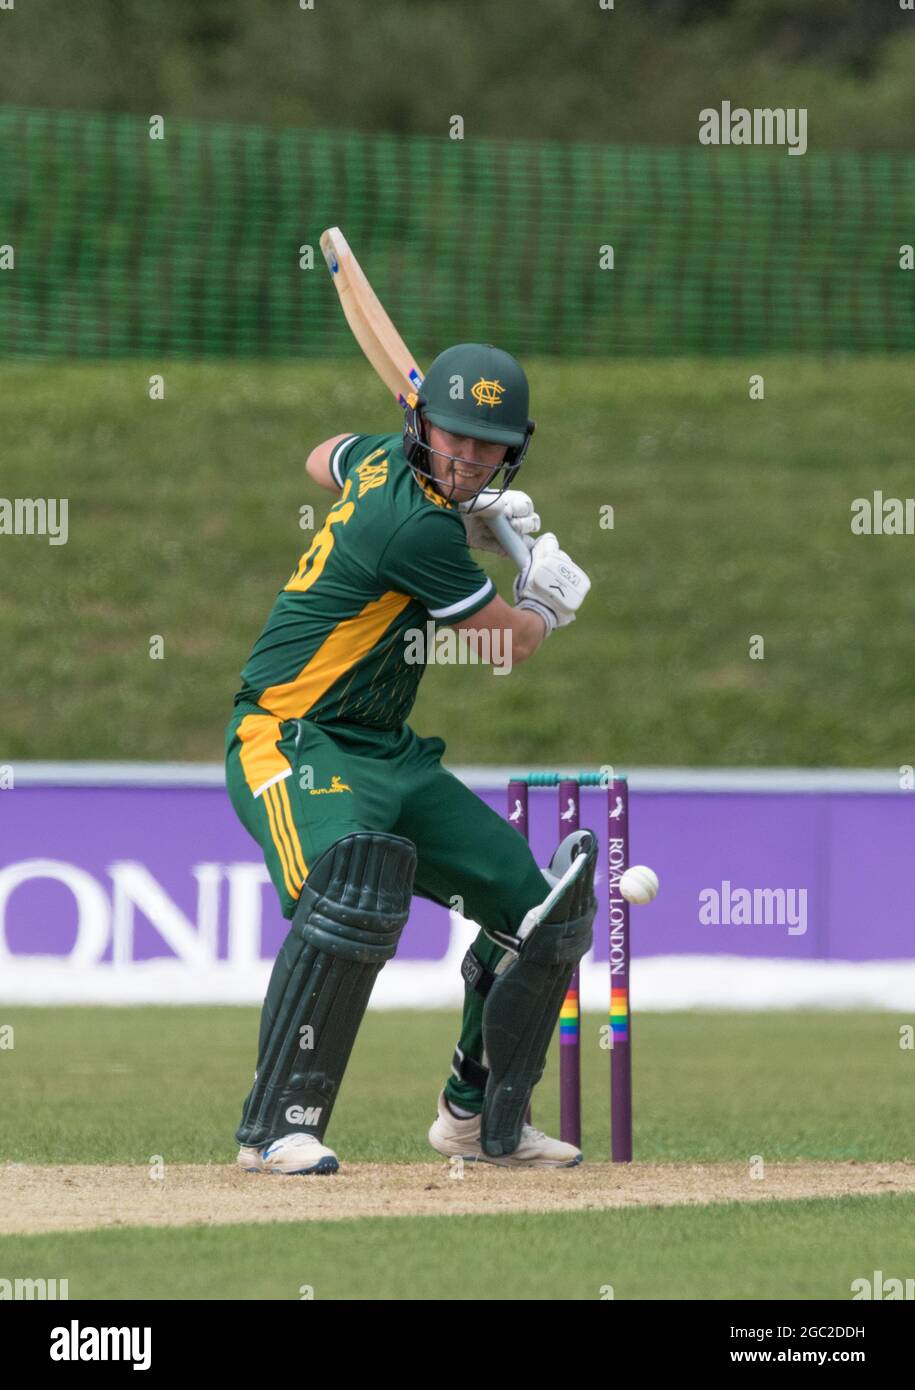 Gruppo B Nottinghamshire Outlaws affrontare le Foxes del Leicestershire al John Fretwell Sporting Complex nella Royal London One-day Cup, 2021. Foto Stock